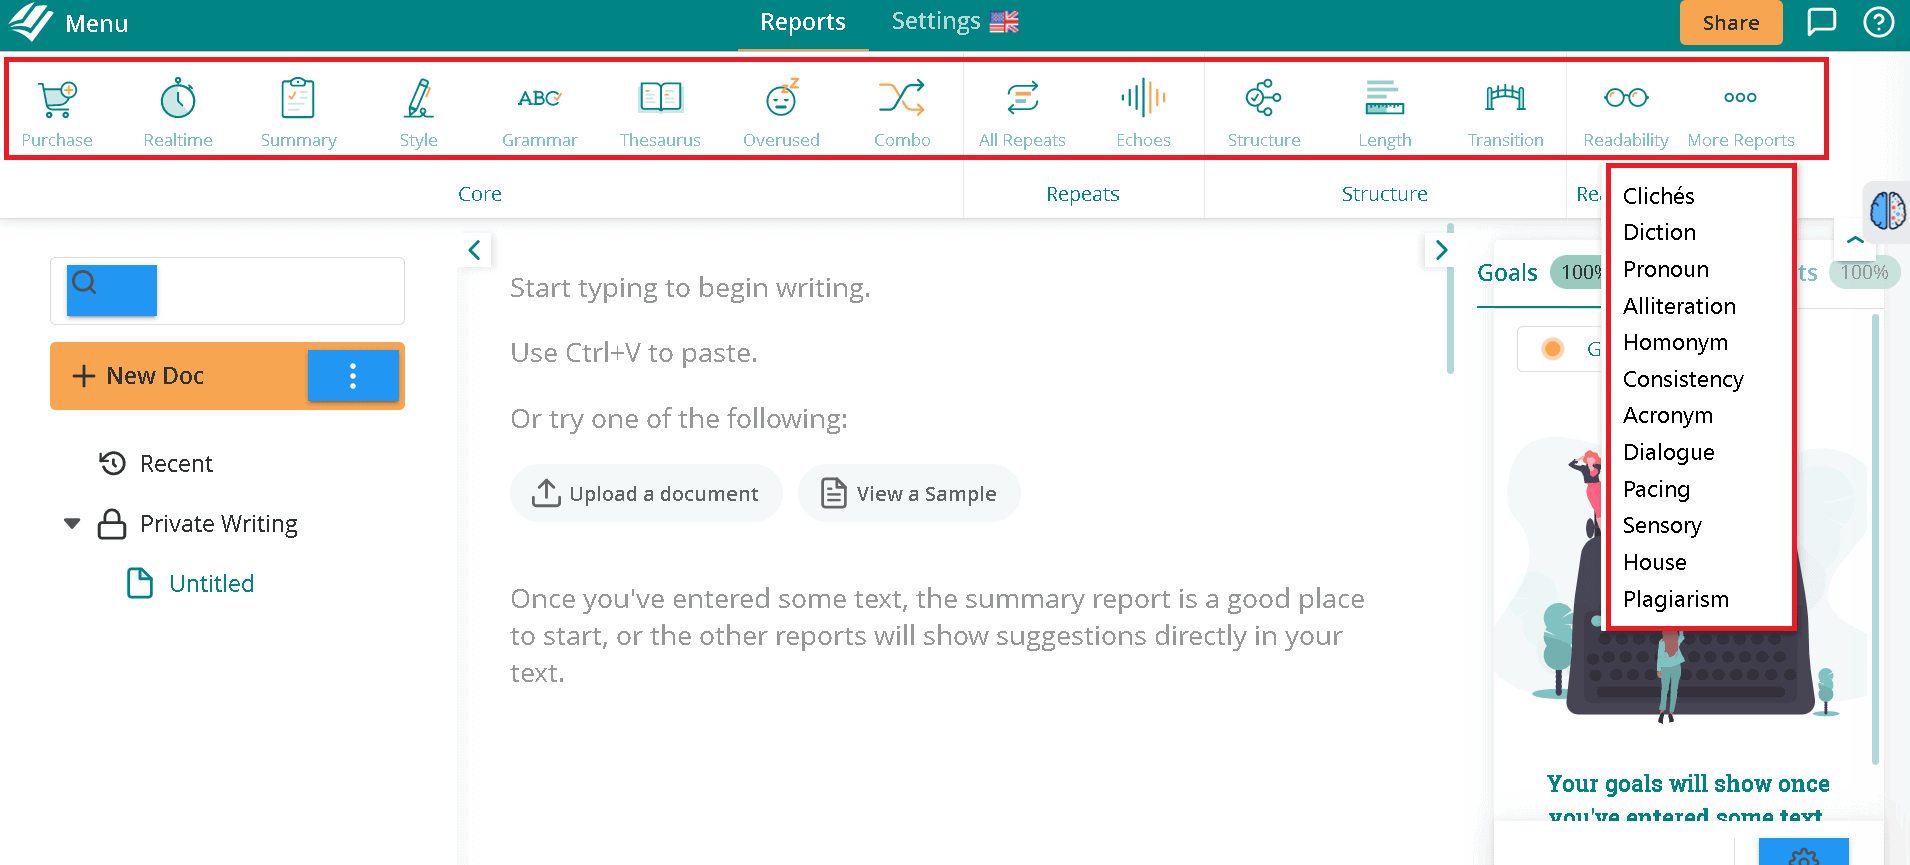 ProWritingAid is more than a grammar checker- many features are available